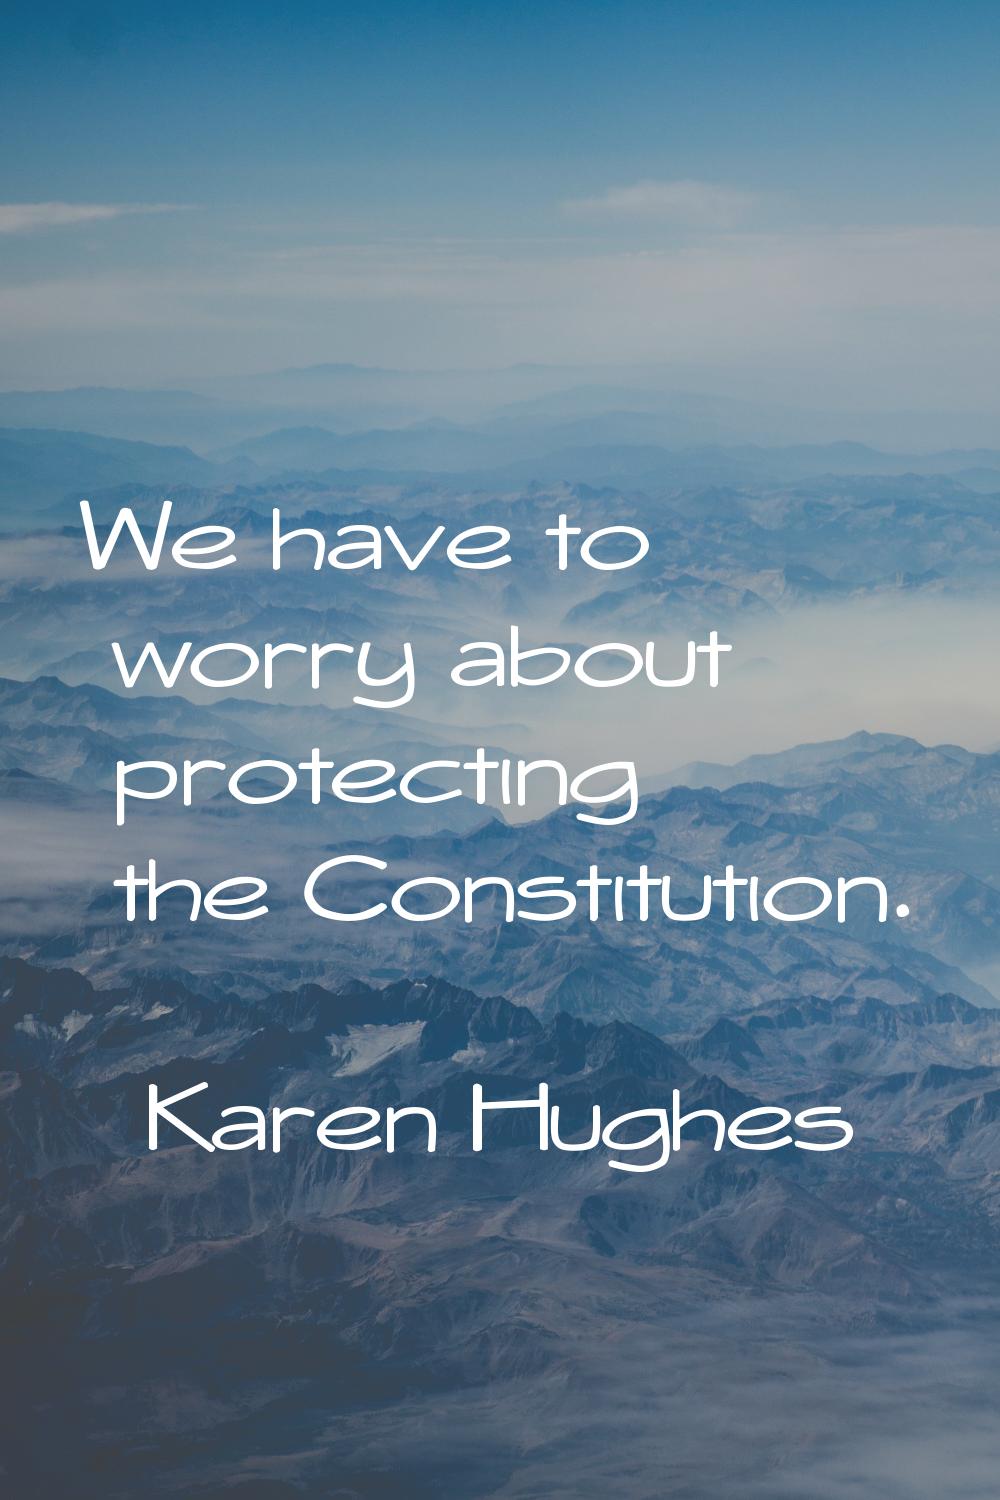 We have to worry about protecting the Constitution.